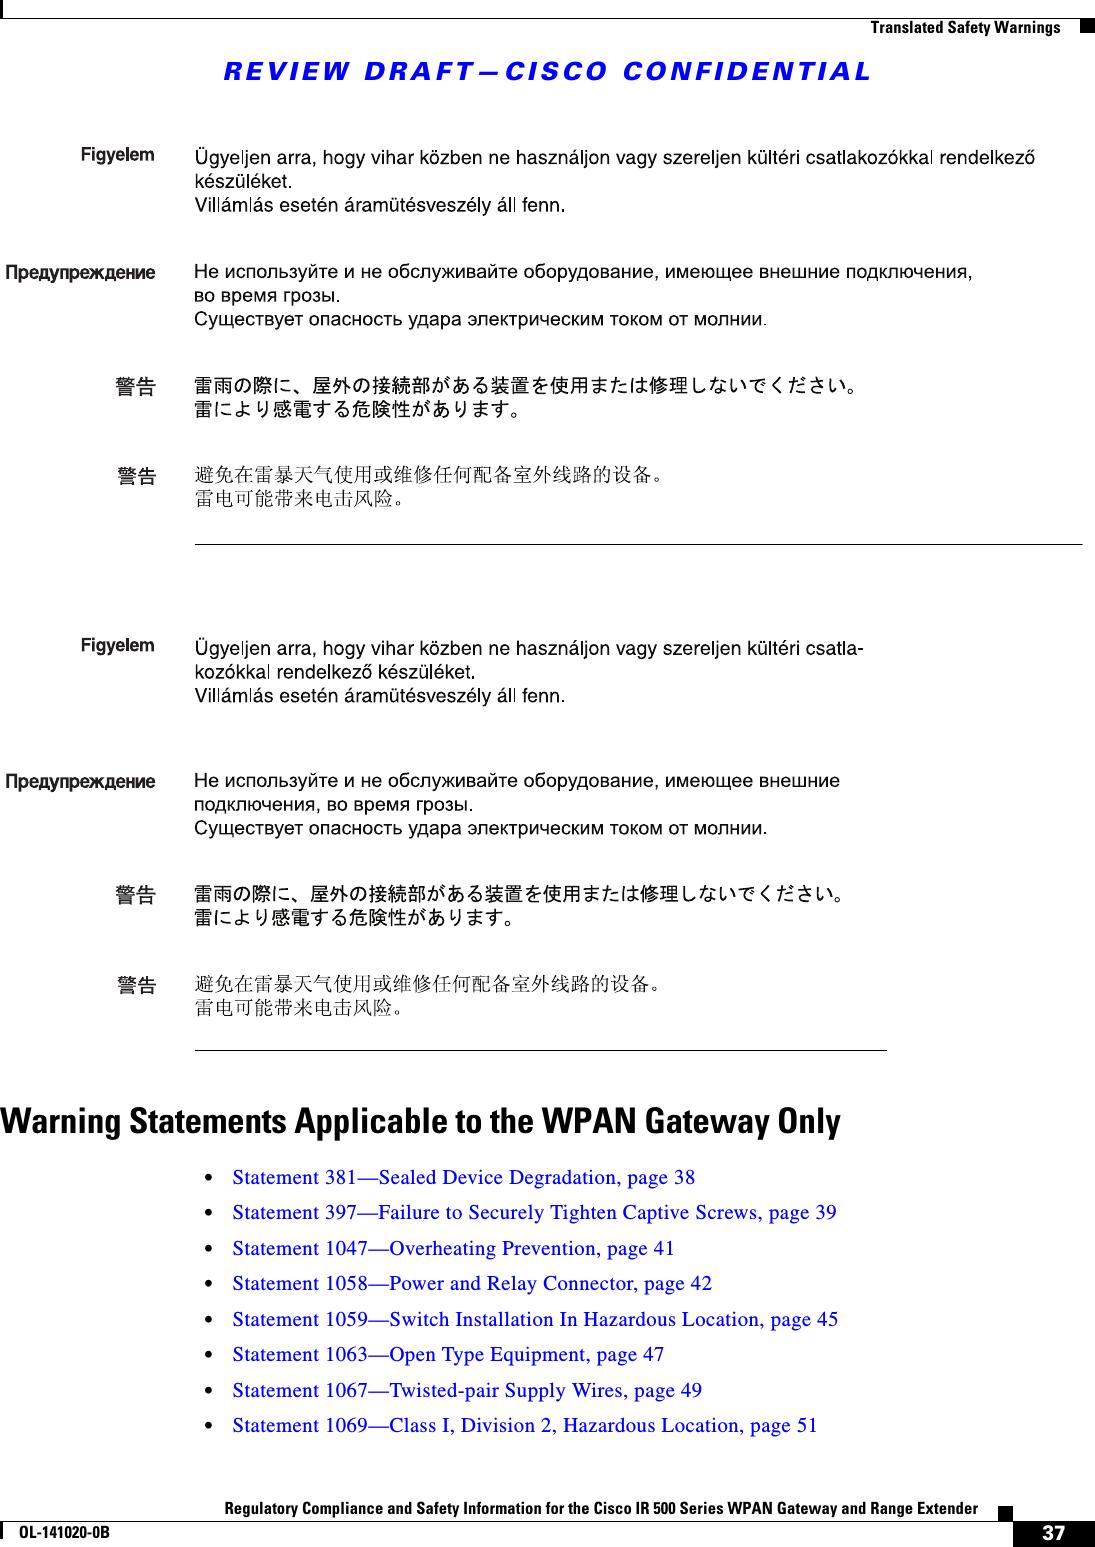 REVIEW DRAFT—CISCO CONFIDENTIAL37Regulatory Compliance and Safety Information for the Cisco IR 500 Series WPAN Gateway and Range ExtenderOL-141020-0B  Translated Safety WarningsWarning Statements Applicable to the WPAN Gateway Only•Statement 381—Sealed Device Degradation, page 38•Statement 397—Failure to Securely Tighten Captive Screws, page 39•Statement 1047—Overheating Prevention, page 41•Statement 1058—Power and Relay Connector, page 42•Statement 1059—Switch Installation In Hazardous Location, page 45•Statement 1063—Open Type Equipment, page 47•Statement 1067—Twisted-pair Supply Wires, page 49•Statement 1069—Class I, Division 2, Hazardous Location, page 51